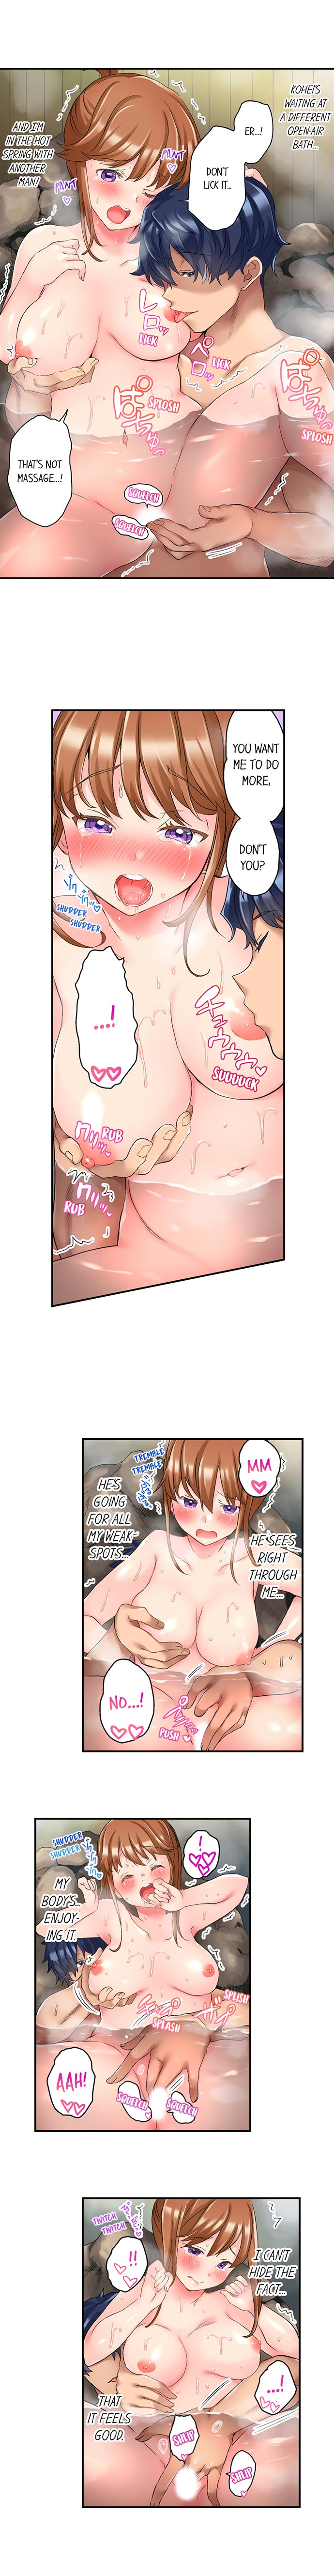 NTR Massage - Chapter 9 Page 2